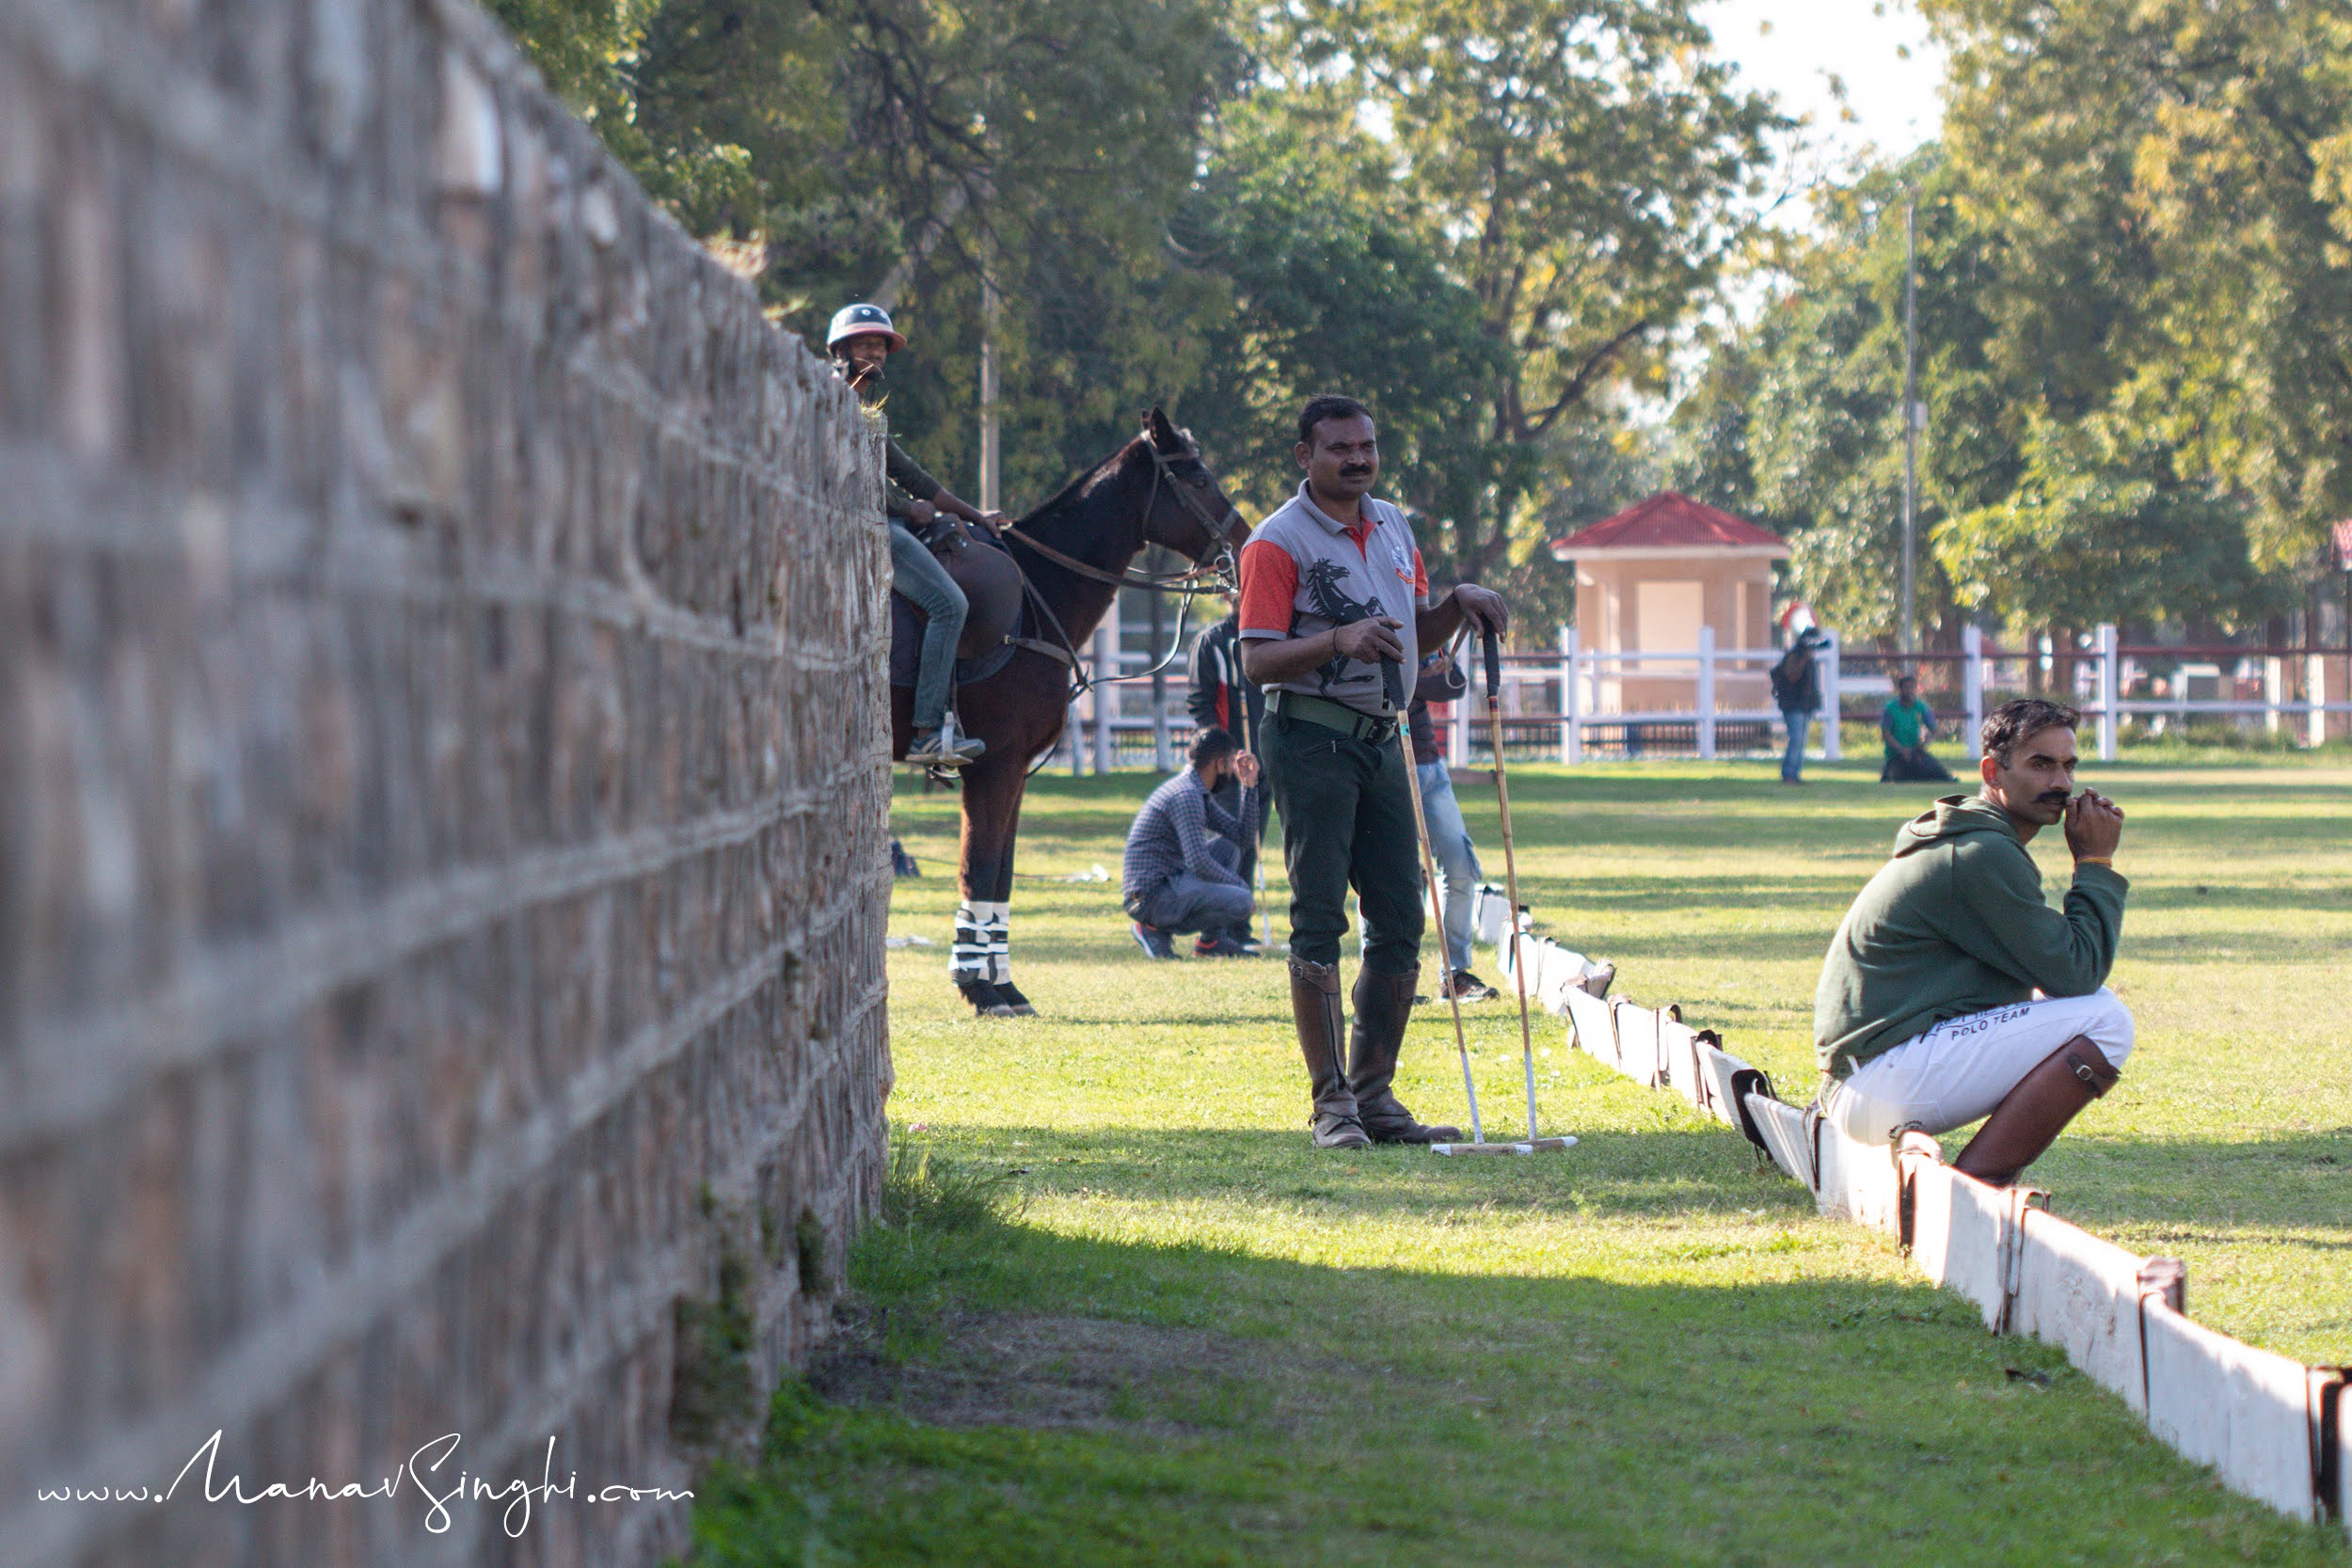 Rajasthan Polo Club Cup - Day 2